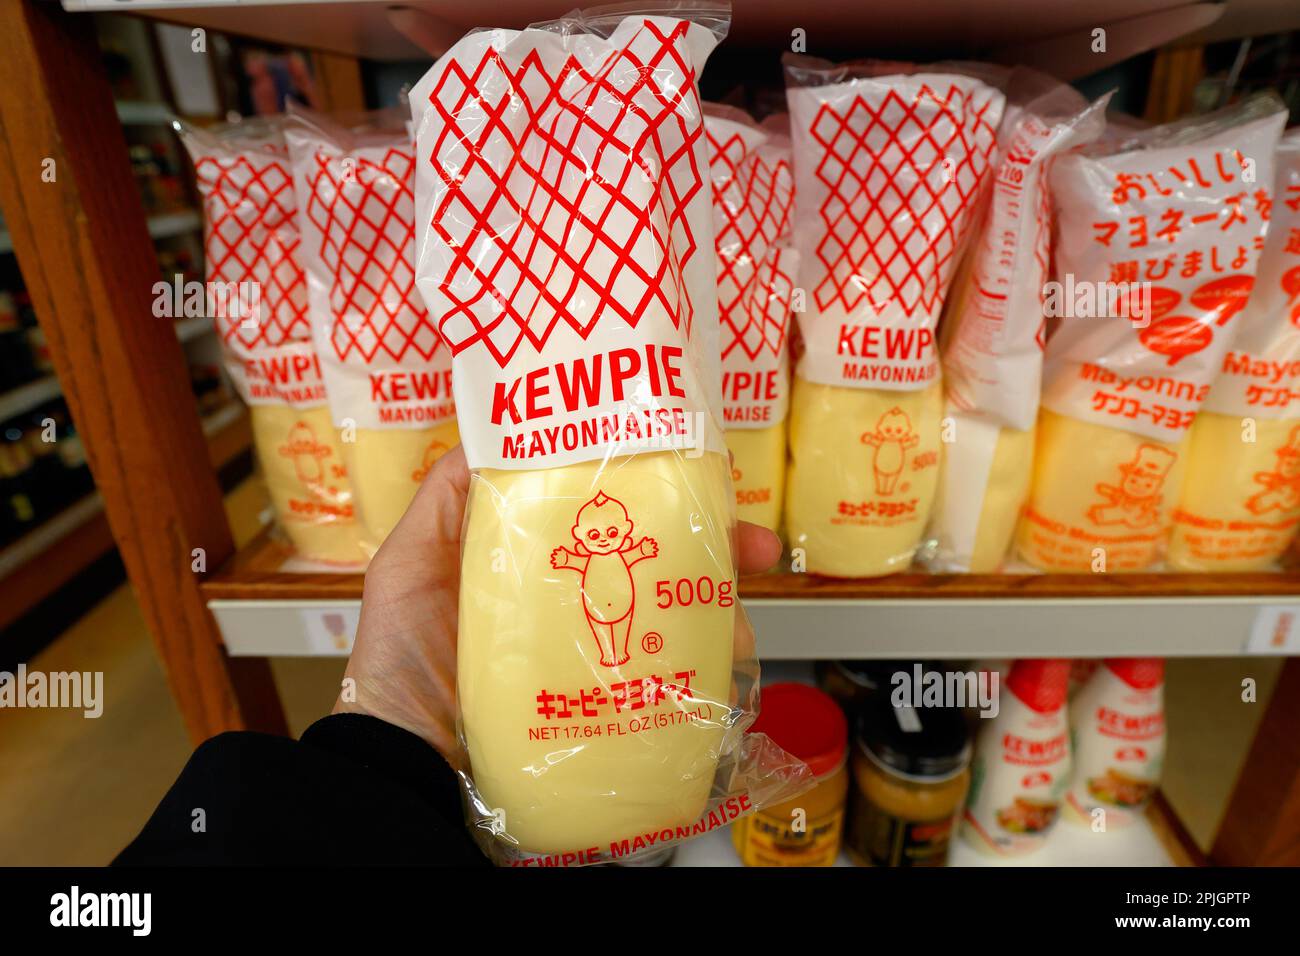 A 500g bottle of Kewpie mayo. Kewpie is a flavorful Japanese Mayonnaise made with only egg yolks, oil, vinegar blend, and some MSG. Stock Photo